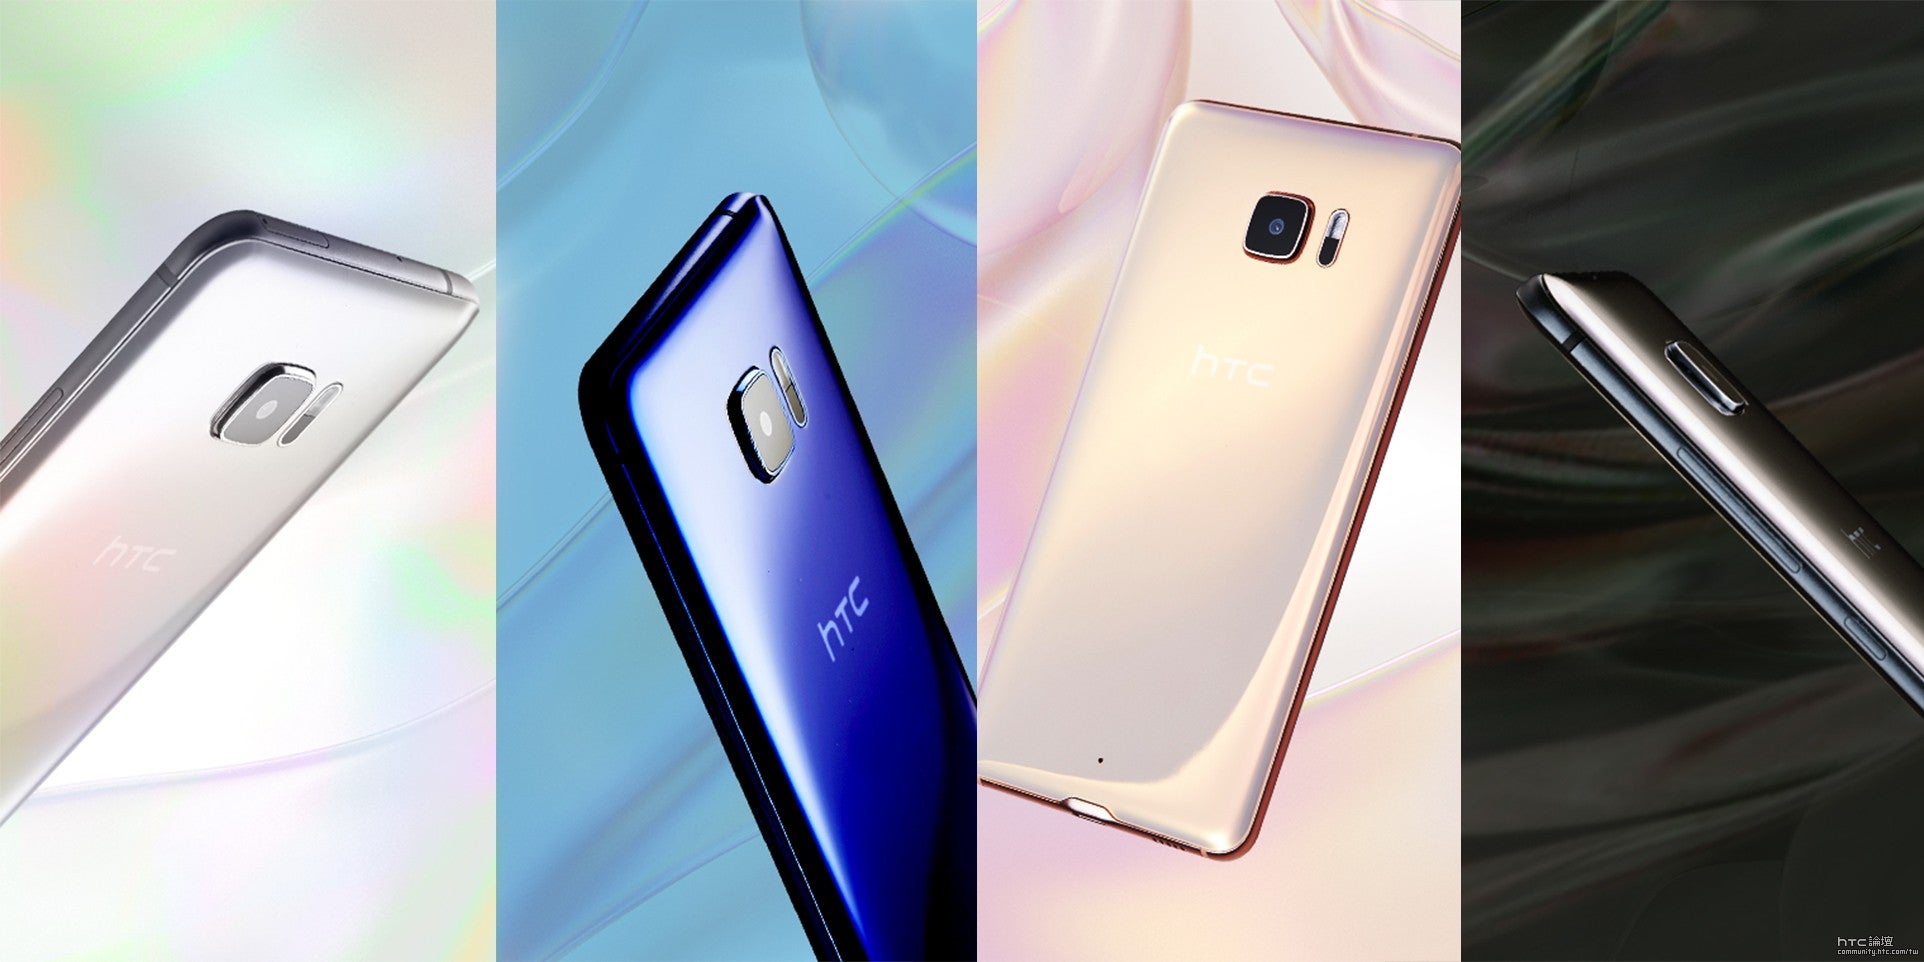 HTC U Ultra is one giant phone: see how much bigger it is than LG V20, iPhone 7 Plus and Galaxy S7 Edge (size comparison)